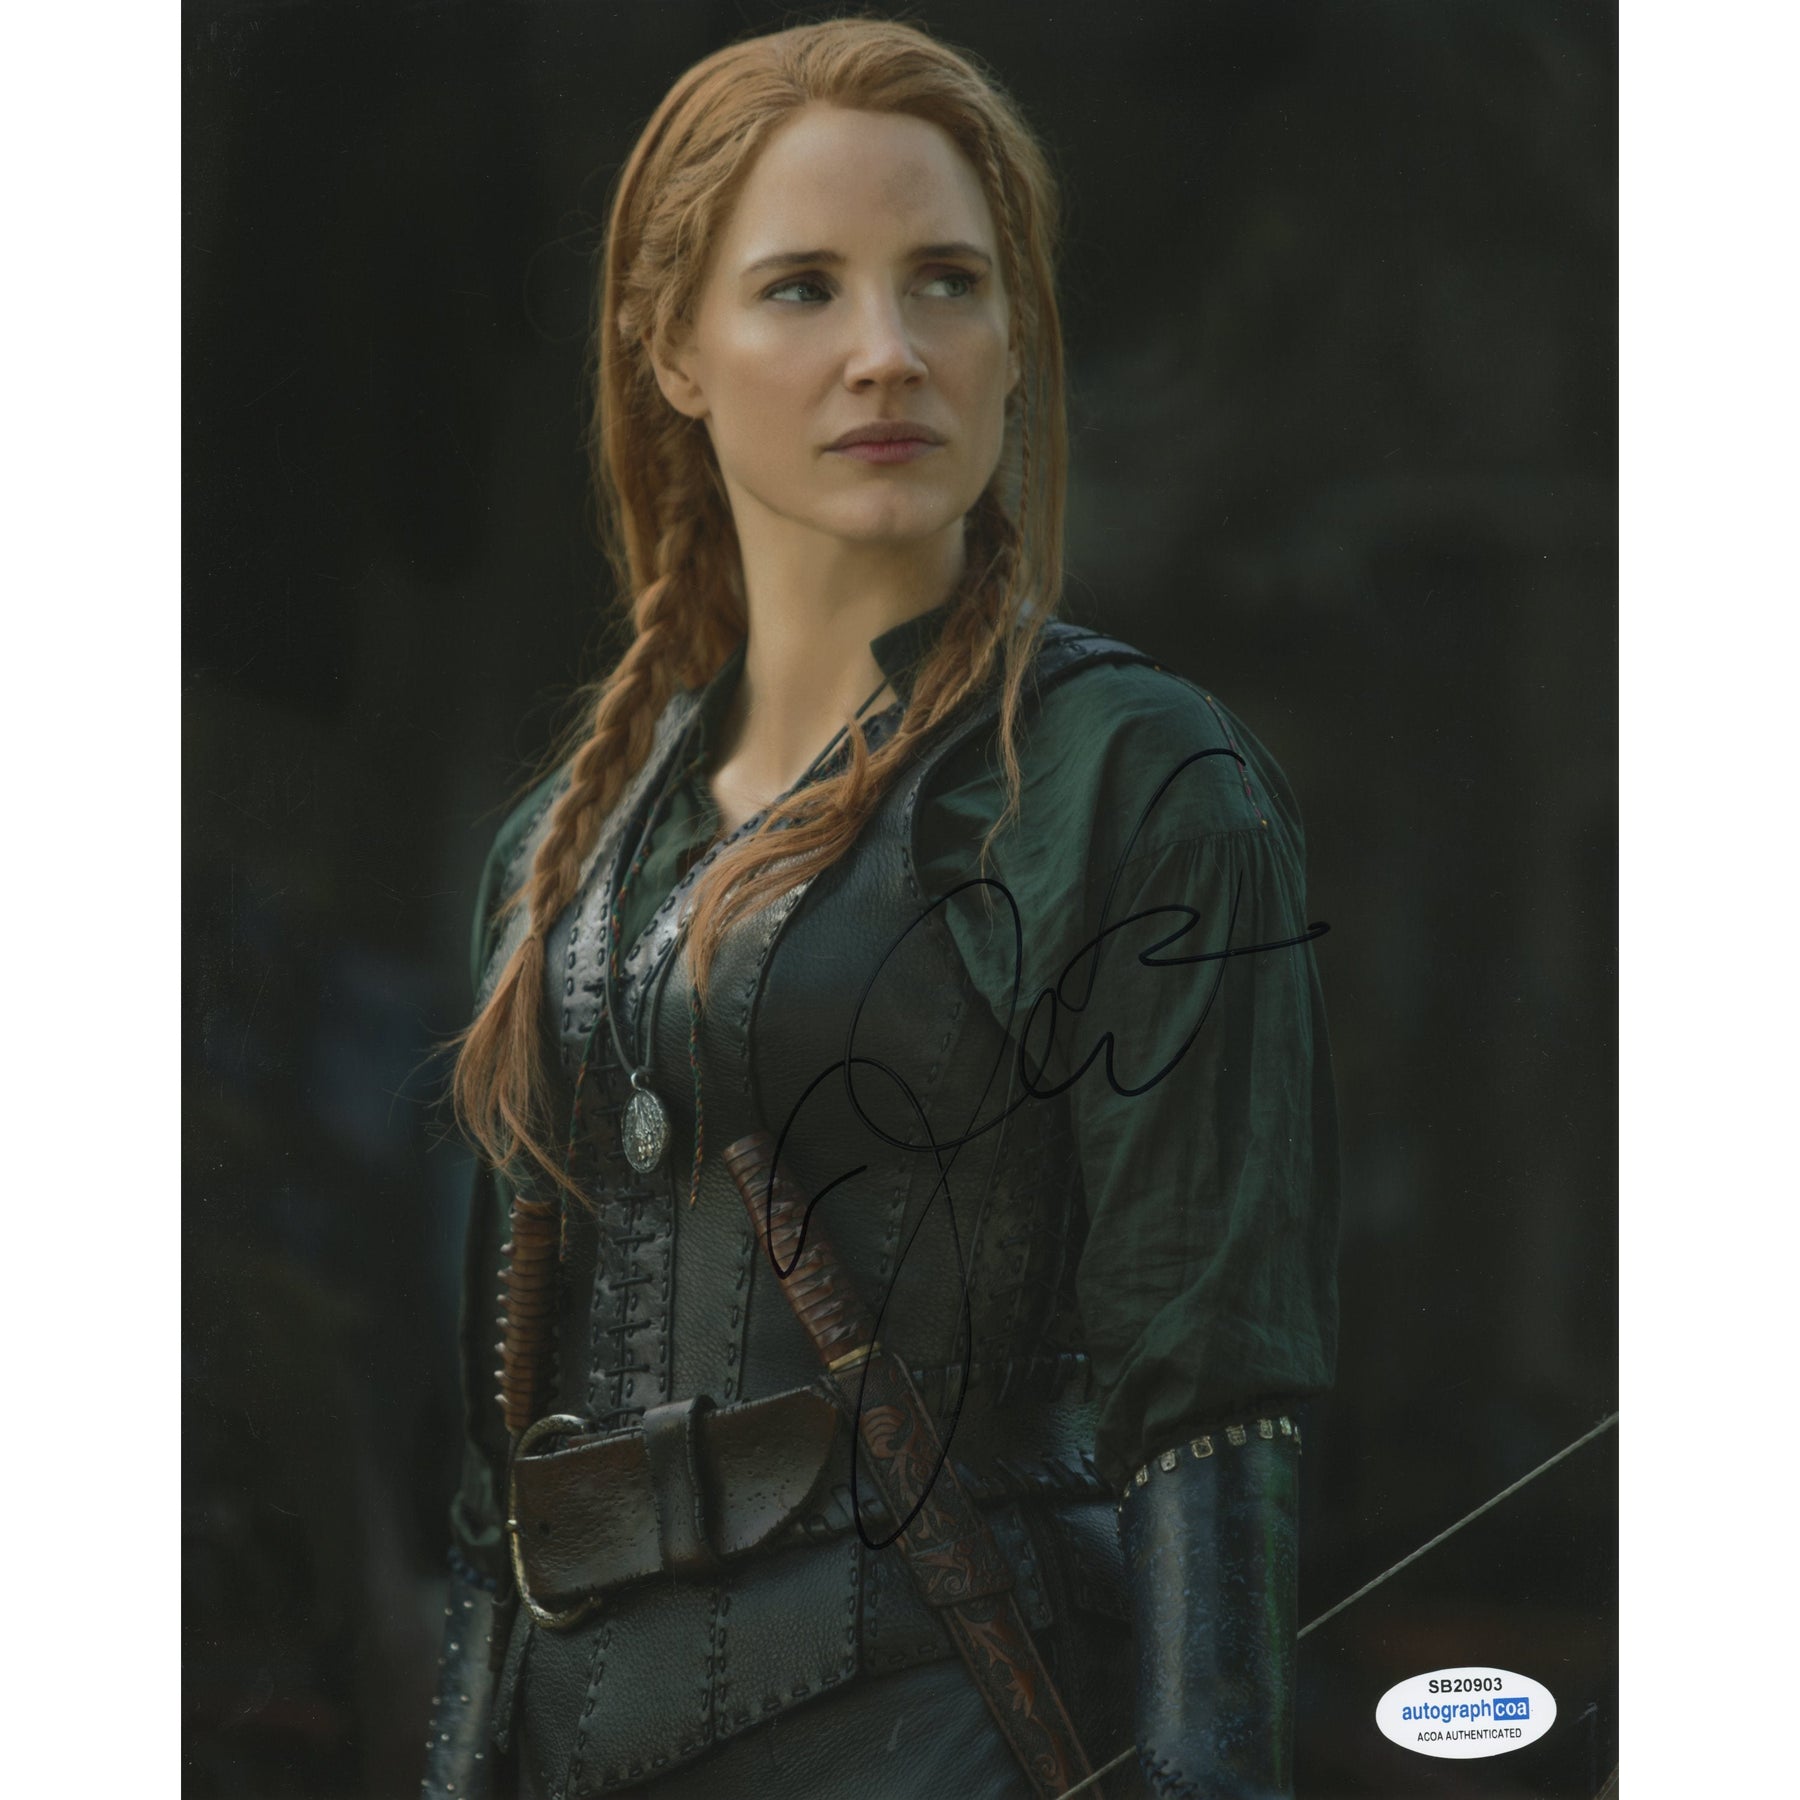 Jessica Chastain Signed 8x10 Photo The Huntsman Autographed Acoa 3 Zobie Productions 